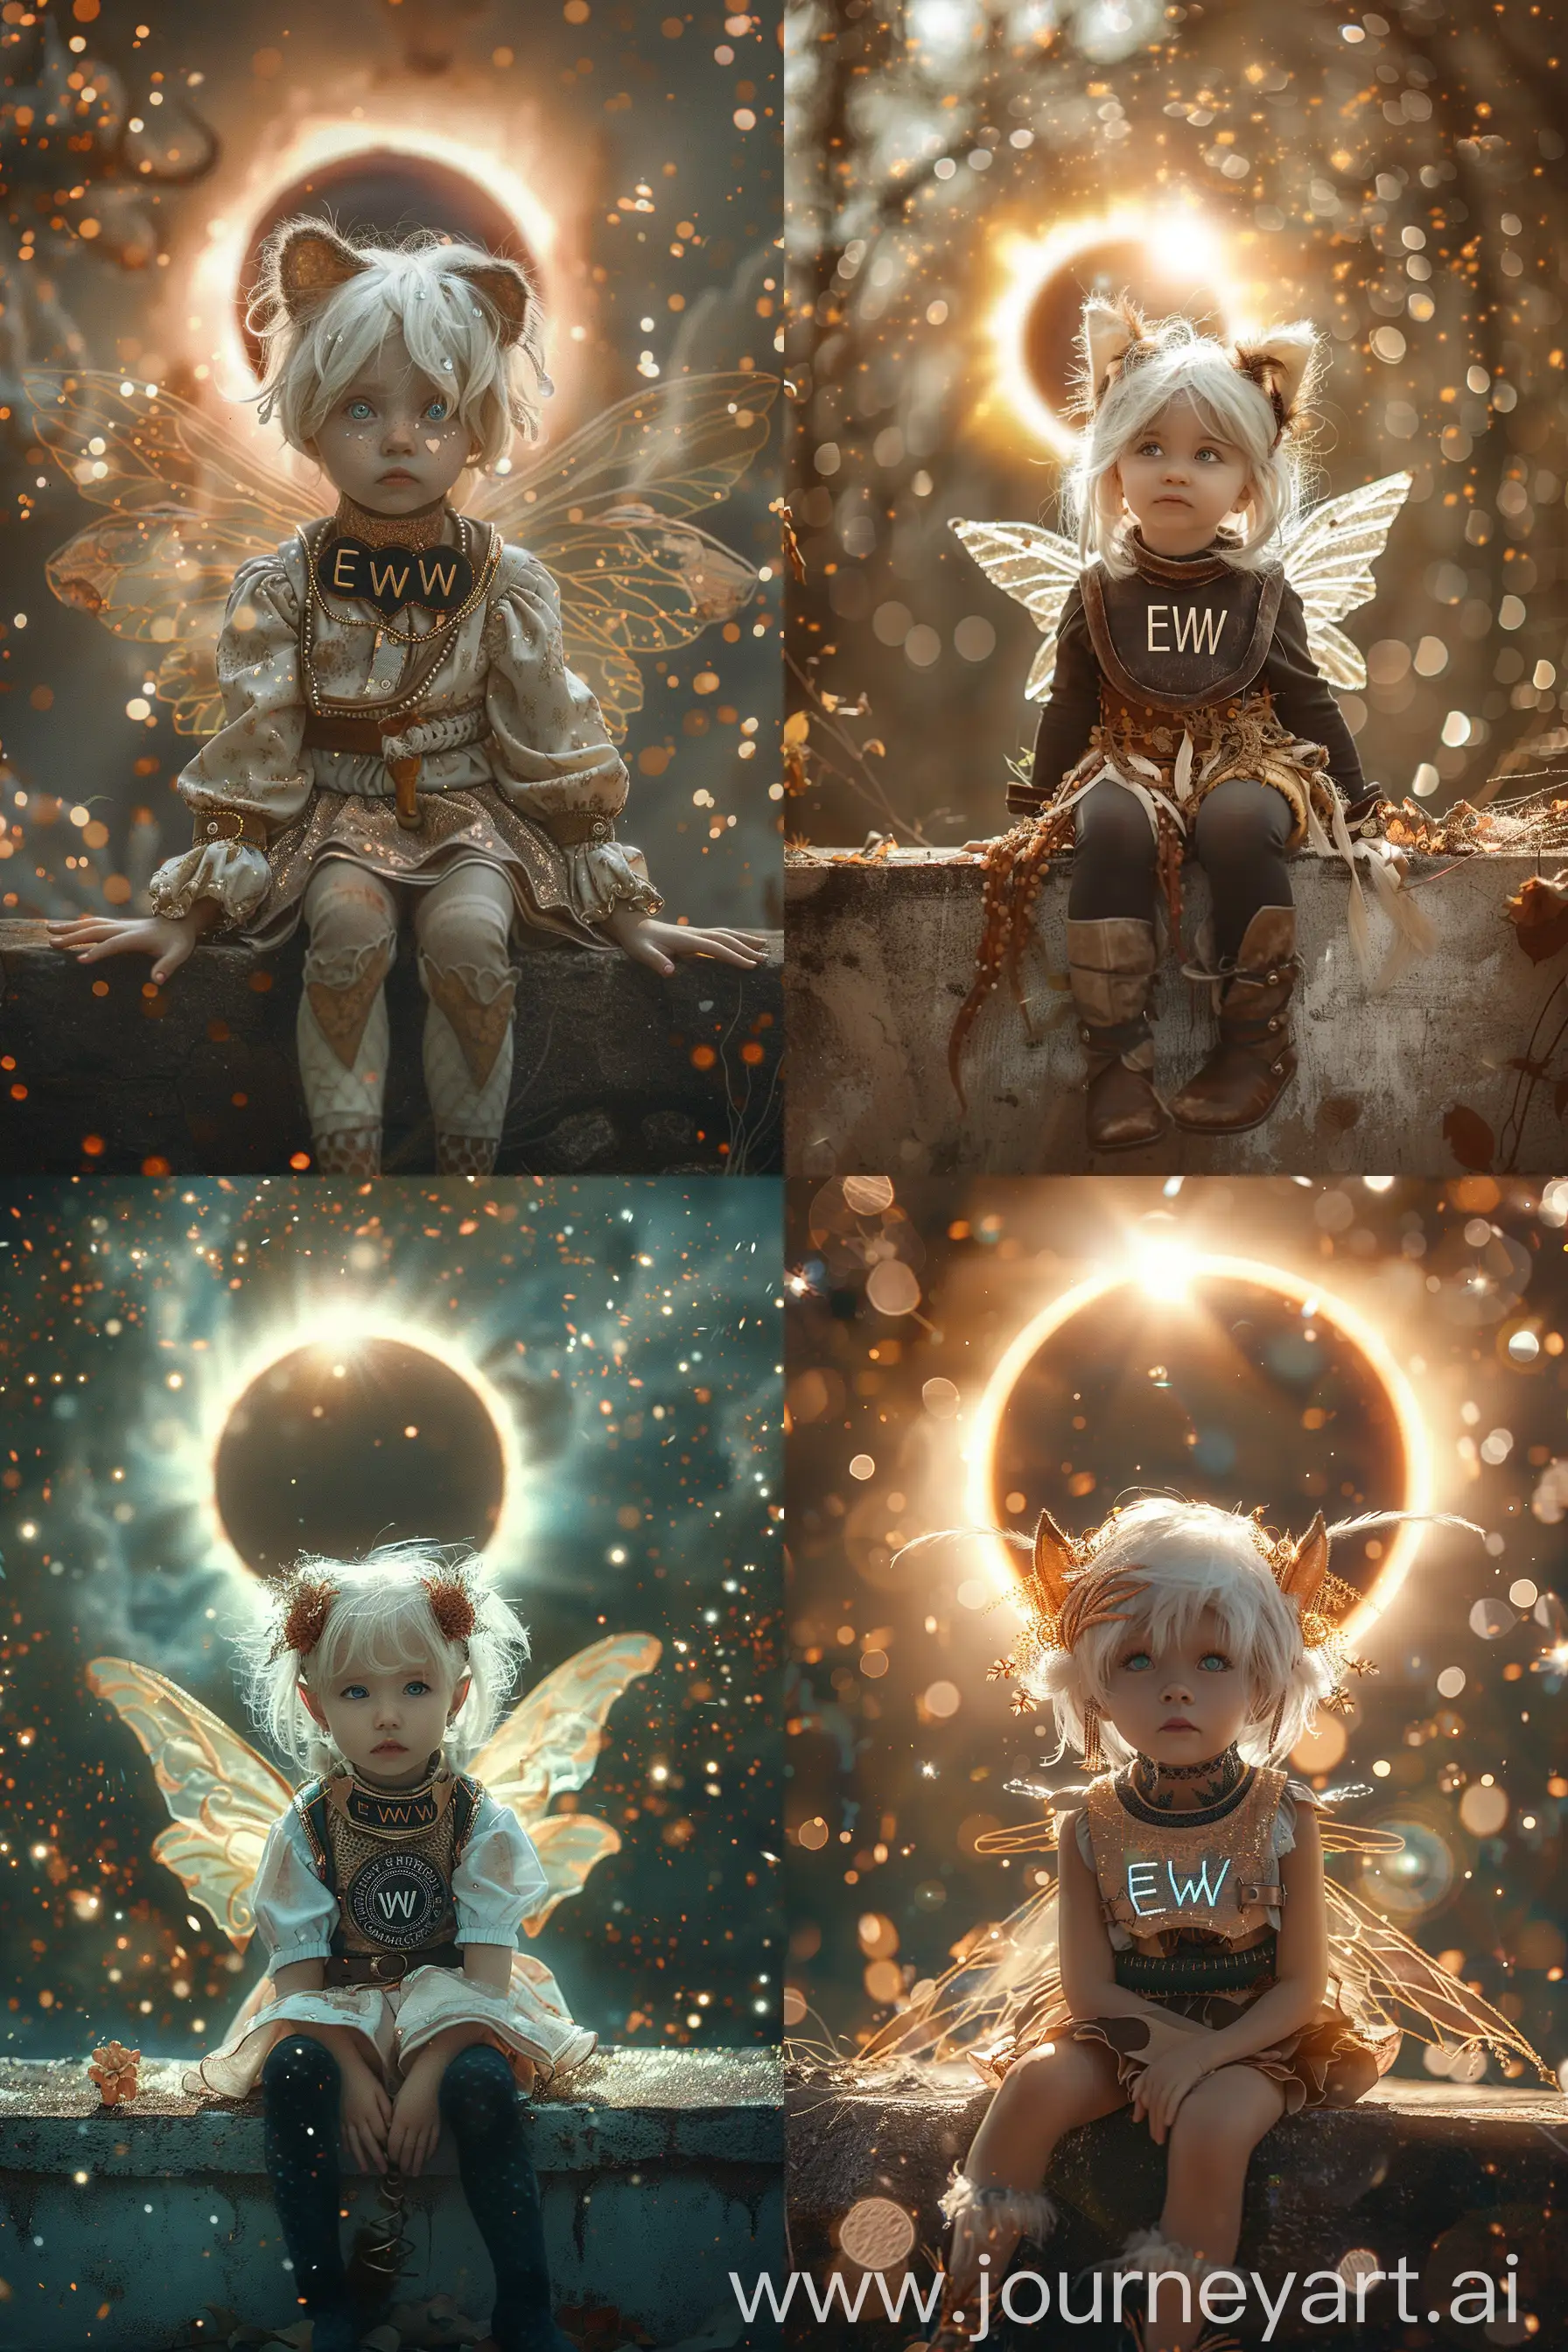 Fantasy-Portrait-of-a-Girl-with-Fairy-Wings-under-a-Solar-Eclipse